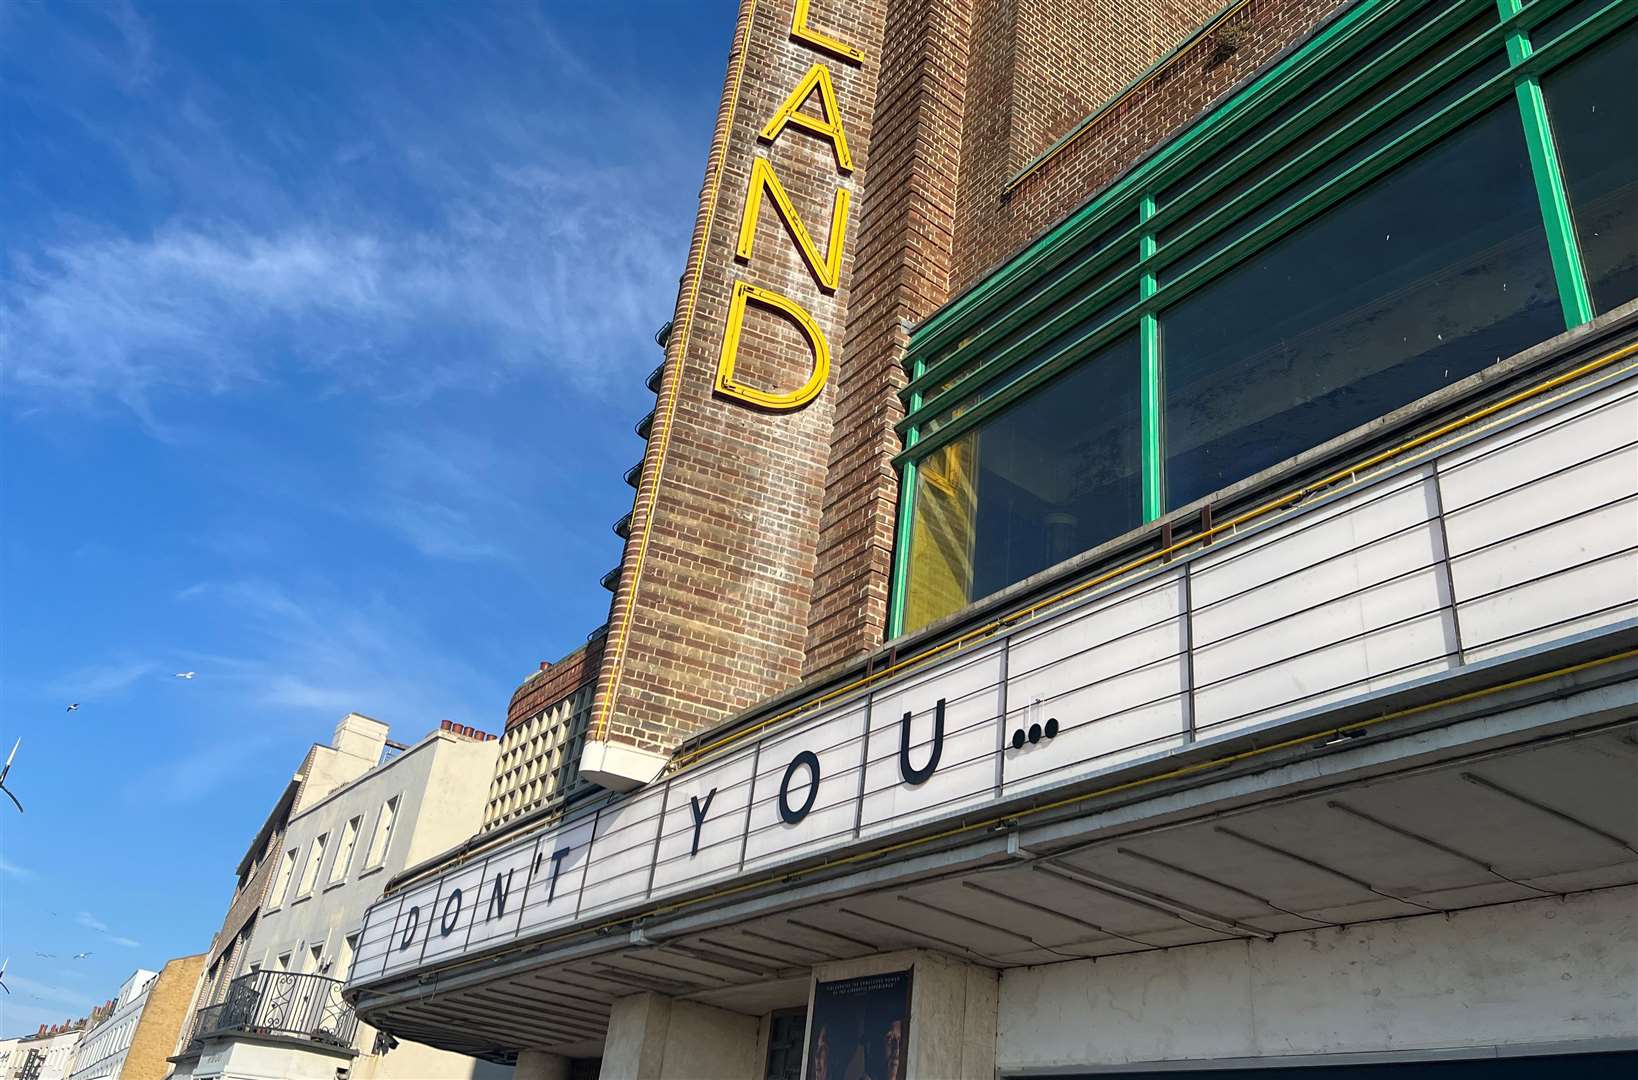 Simple Minds' Don't You (Forget About Me) gets a nod outside the venue's old cinema